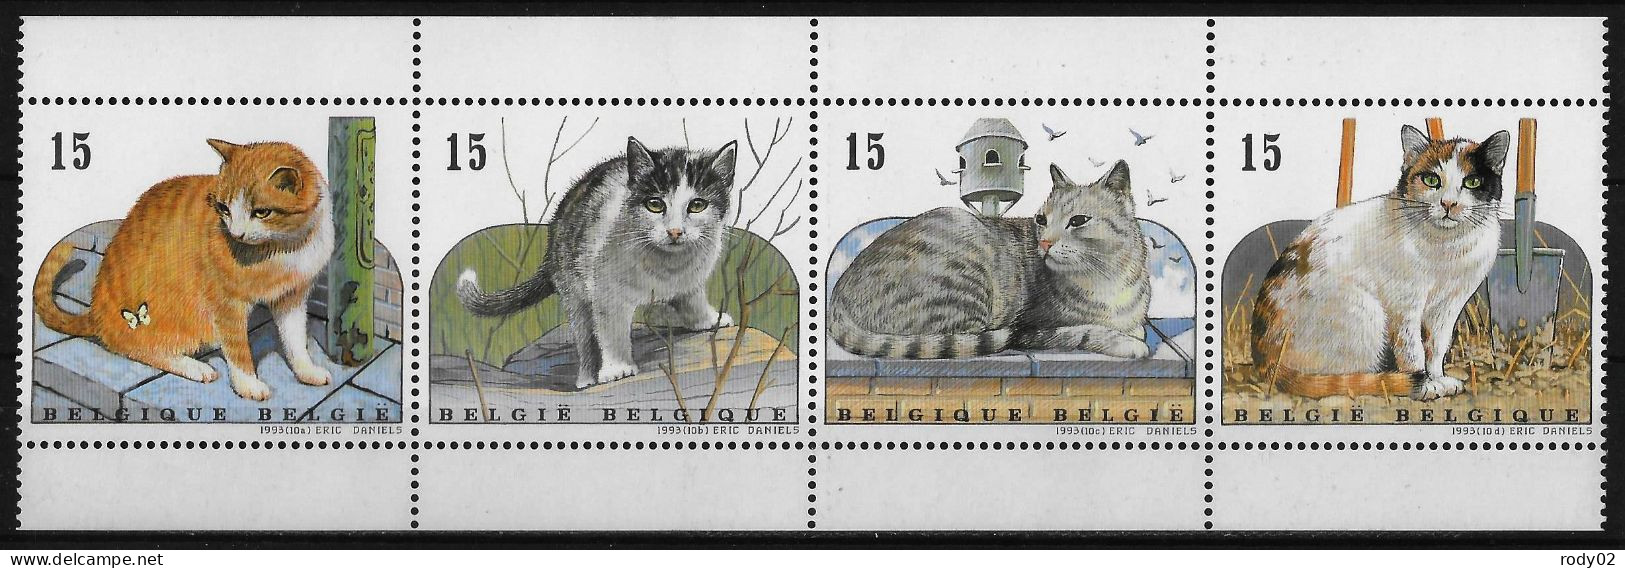 BELGIQUE - CHATS - N° 2521 A 2524 - NEUF** MNH - Domestic Cats